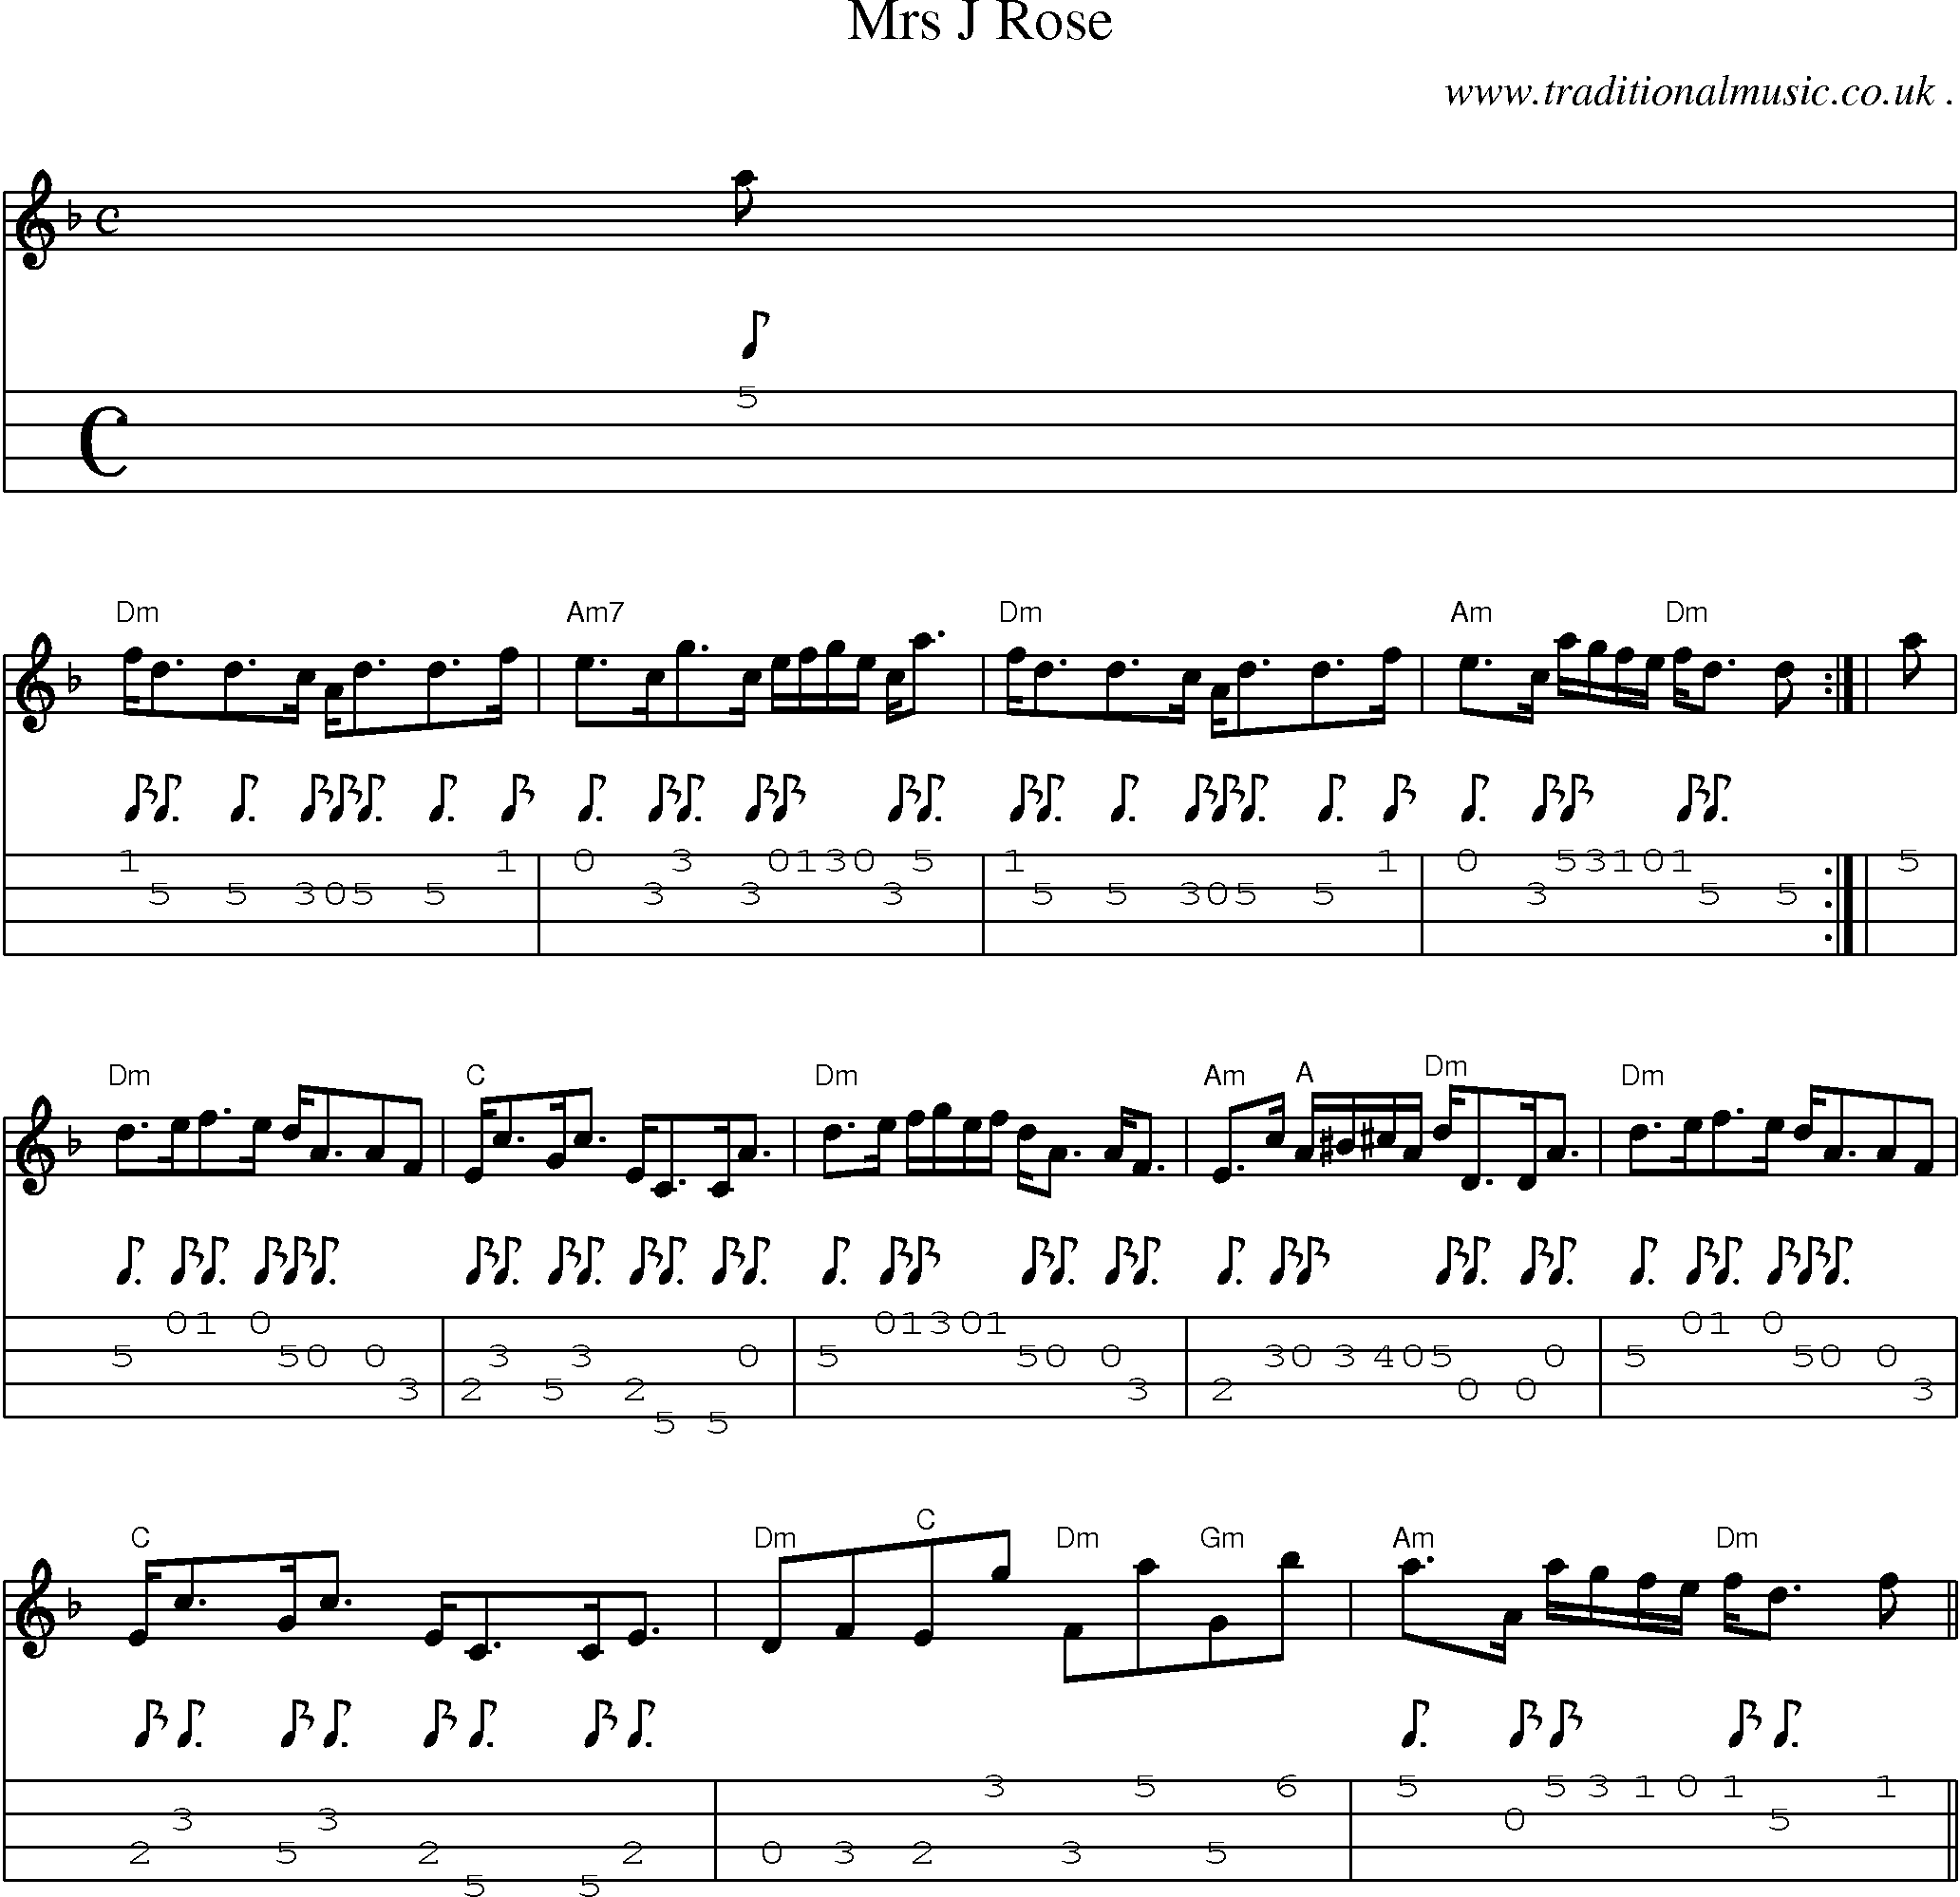 Sheet-music  score, Chords and Mandolin Tabs for Mrs J Rose